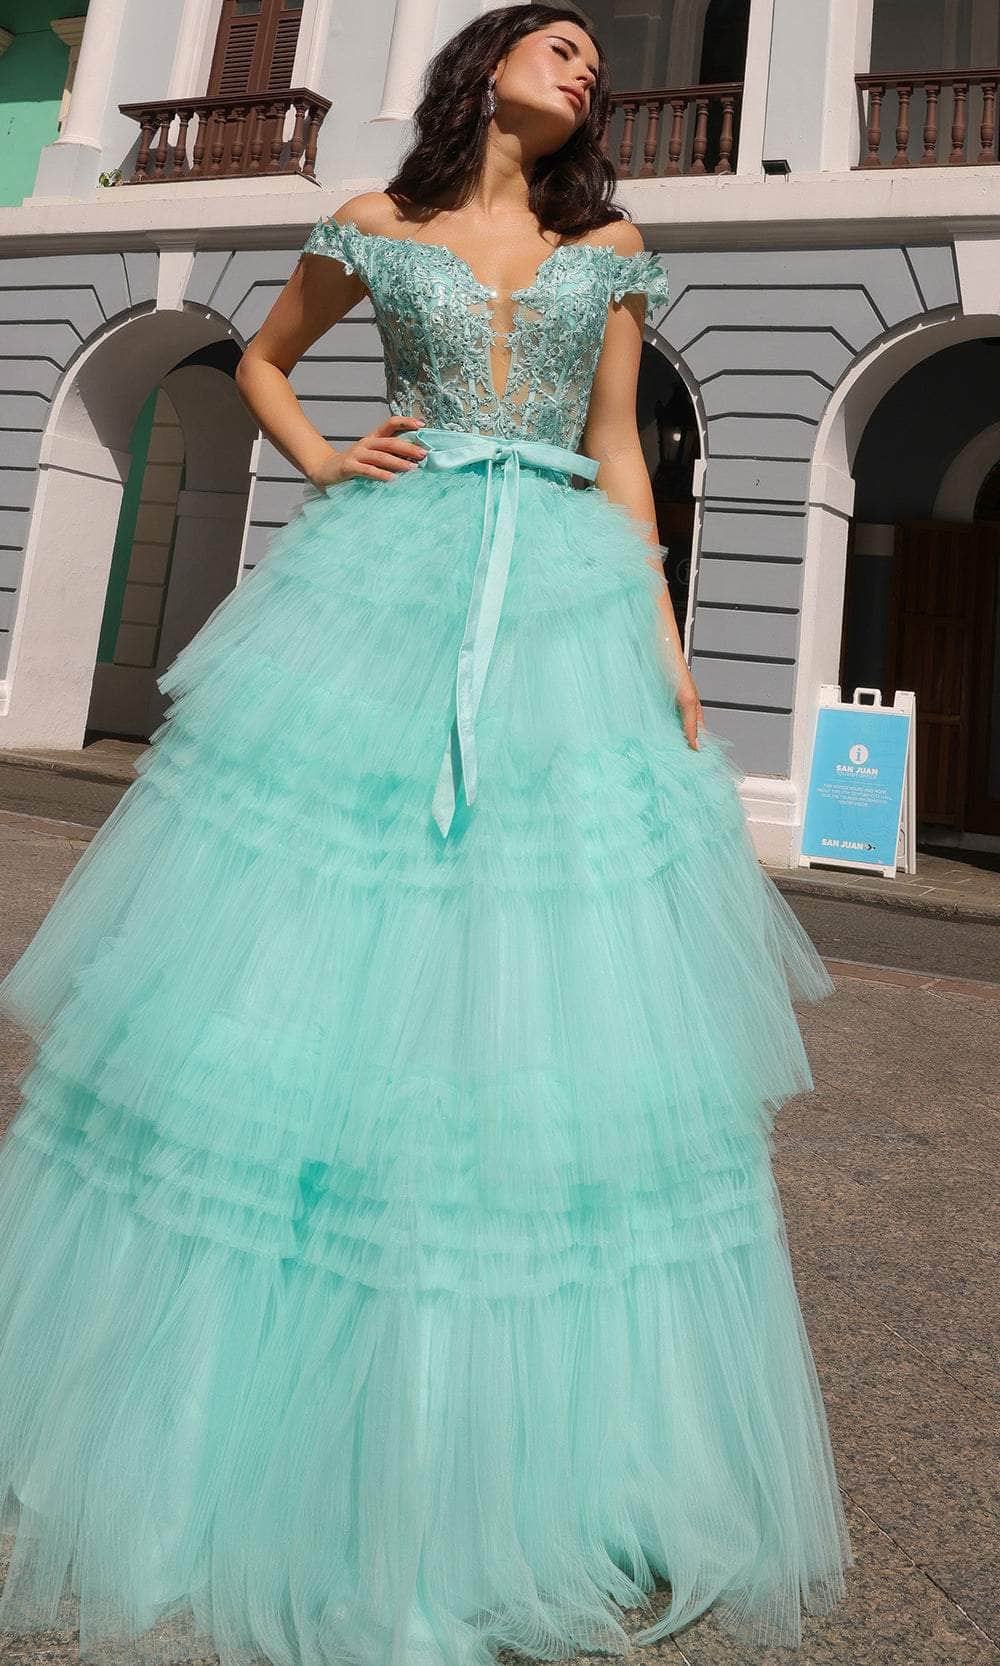 Nox Anabel E1293 - Off Shoulder Tiered Prom Dress Special Occasion Dress 0 / Mint Green